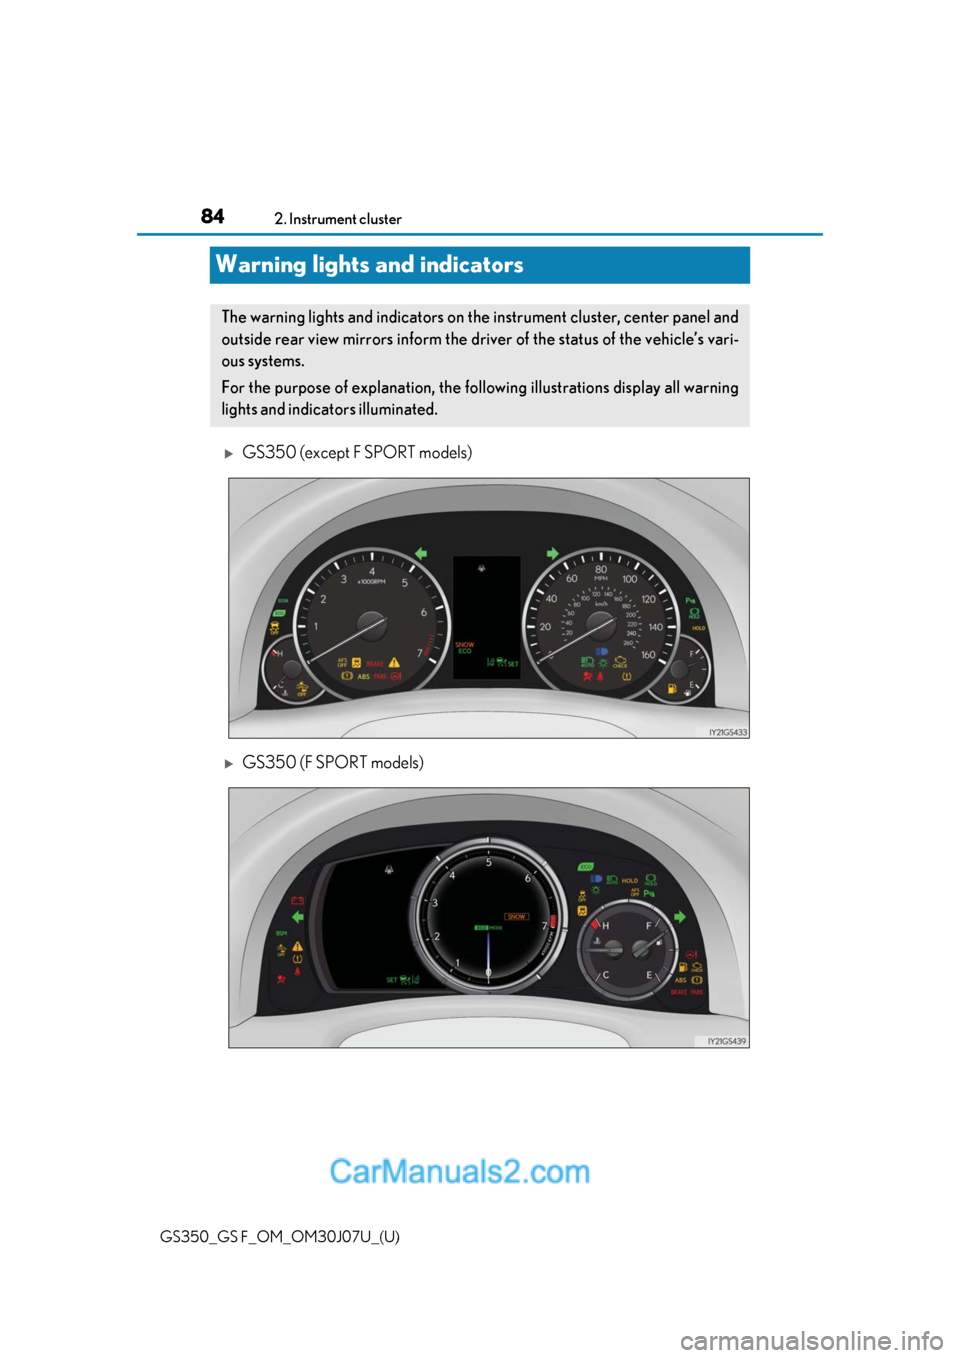 Lexus GS F 2020  Owners Manuals 84
GS350_GS F_OM_OM30J07U_(U)2. Instrument cluster
Warning lights and indicators
GS350 (except F SPORT models)
GS350 (F SPORT models)
The warning lights and indicators on the instrument cluster,